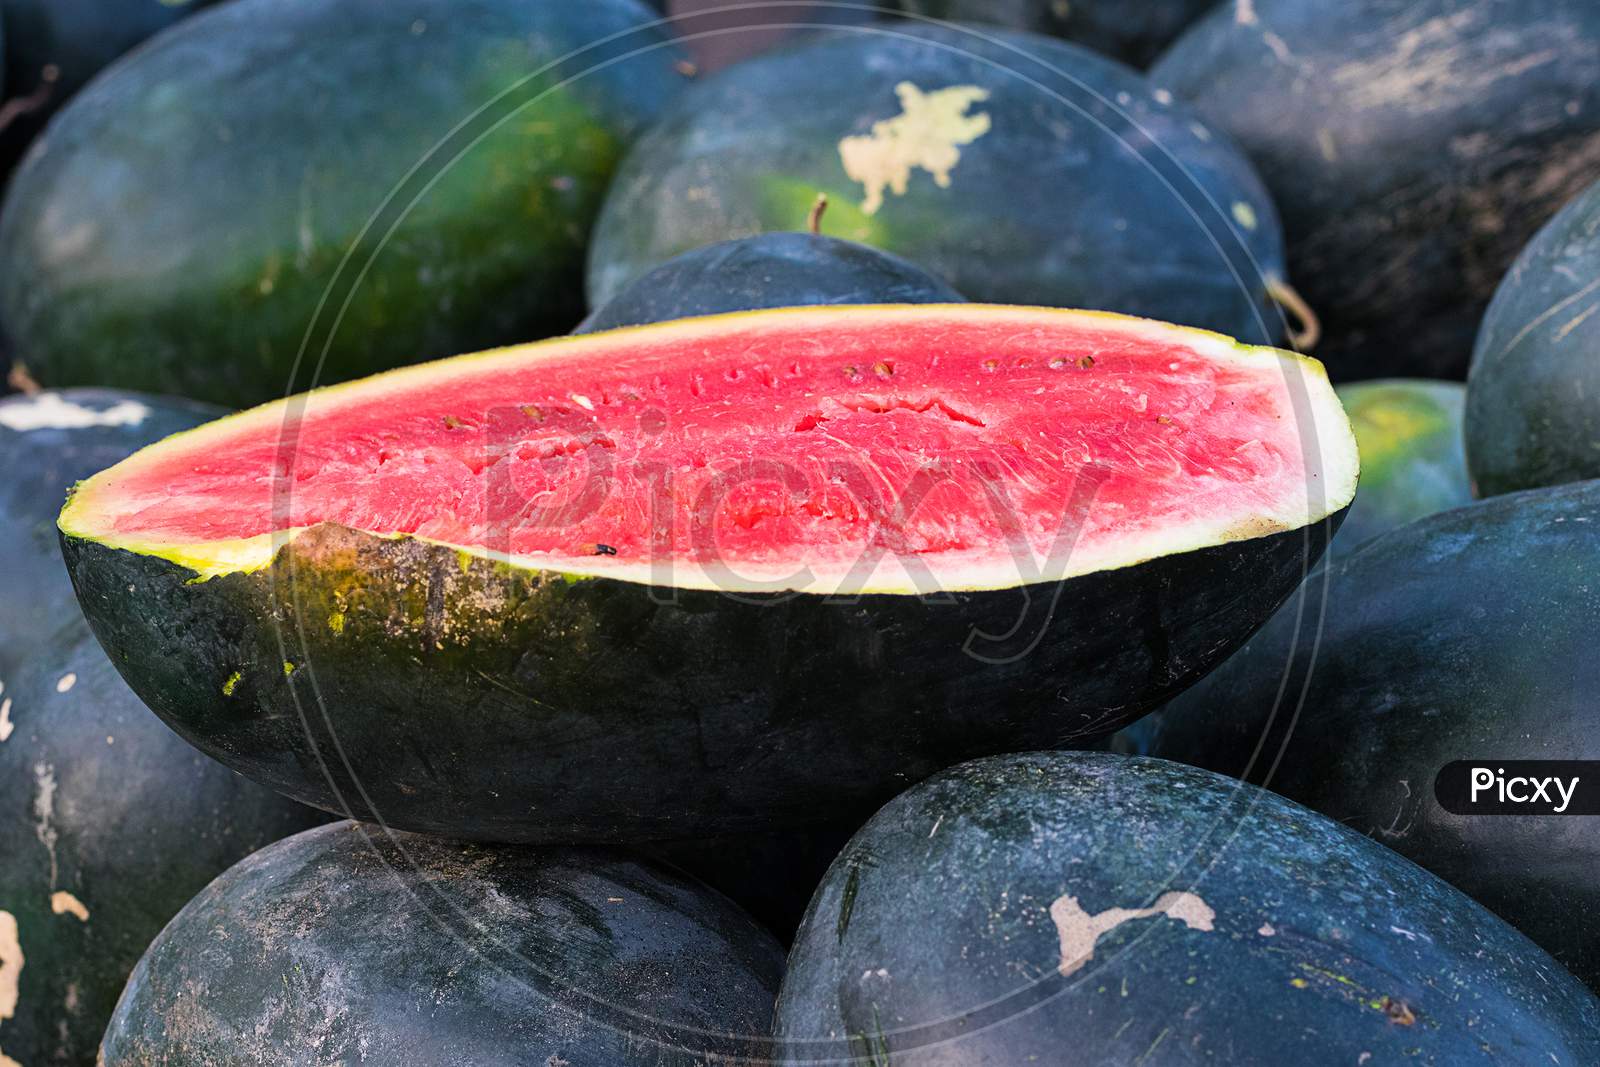 Red Cut Watermelon On A Pile Of Ripe Watermelons